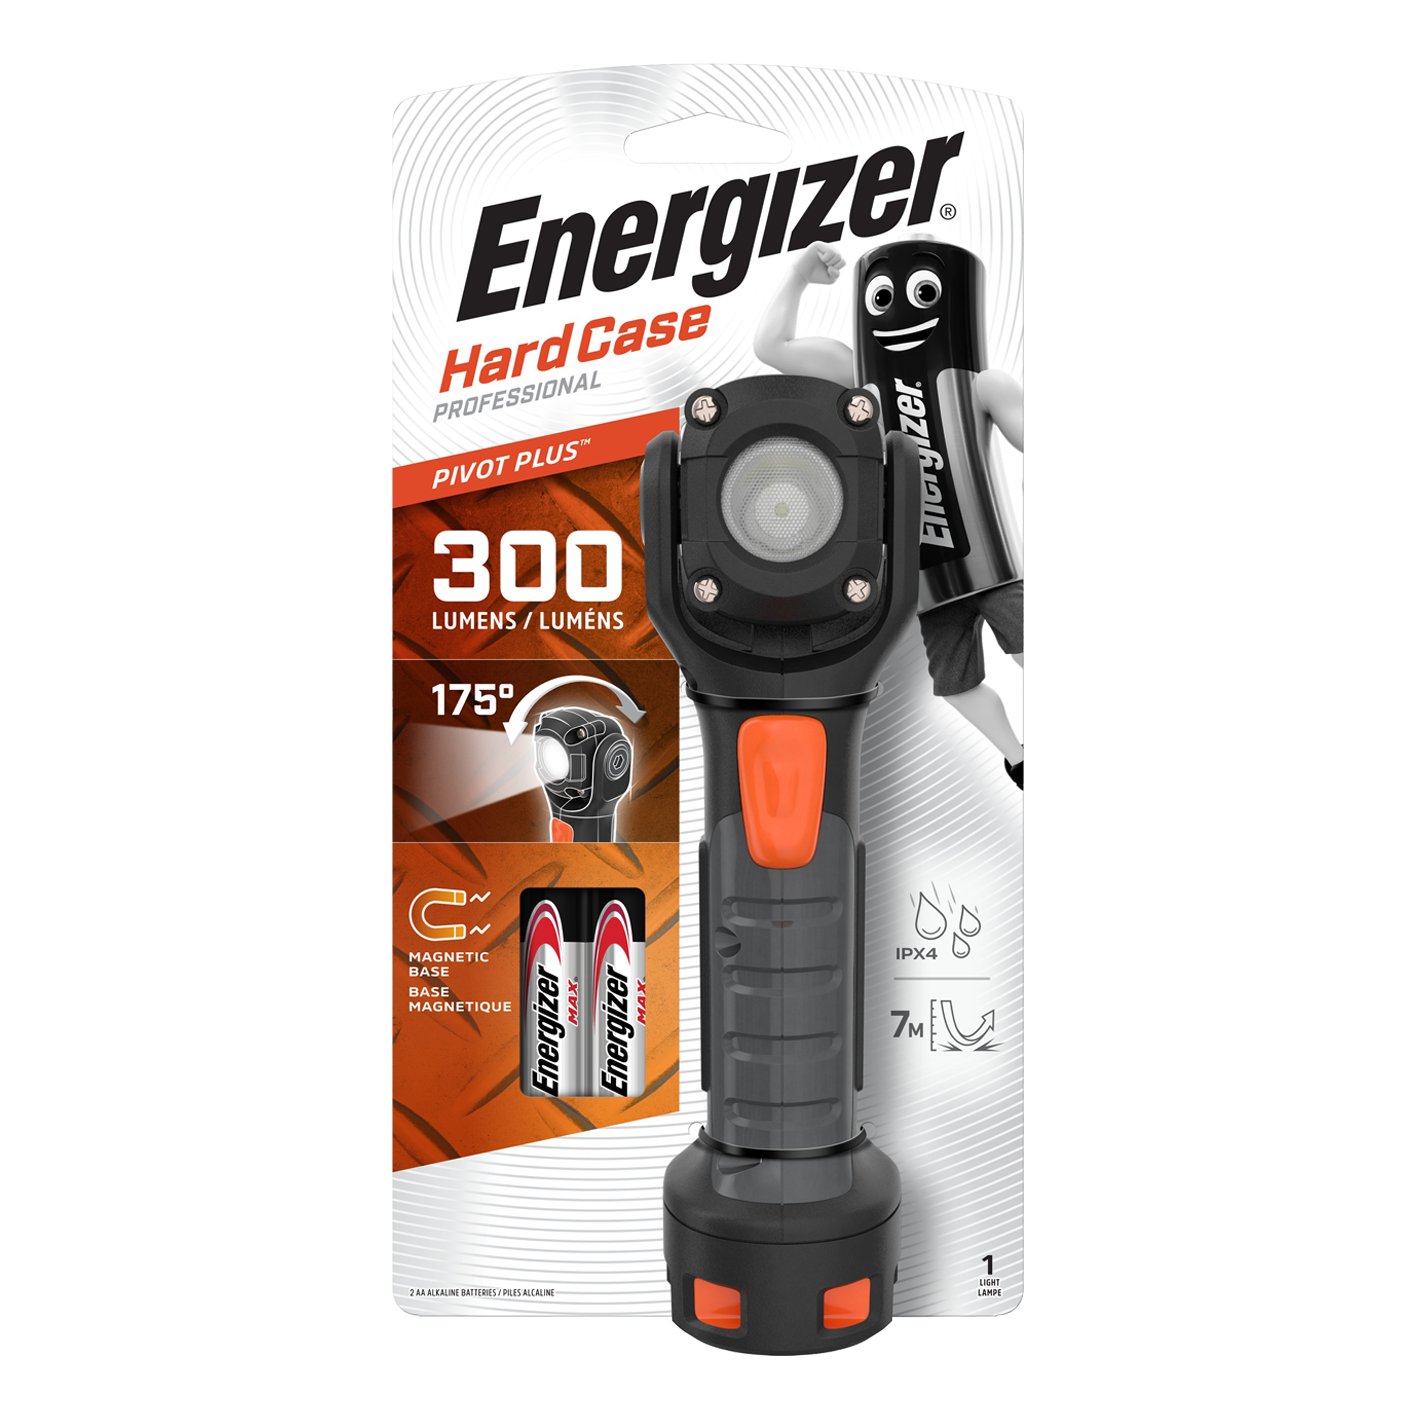 Energizer Hardcase 300 Lumens LED Pivot Plus Torch With 2 x AA Batteries